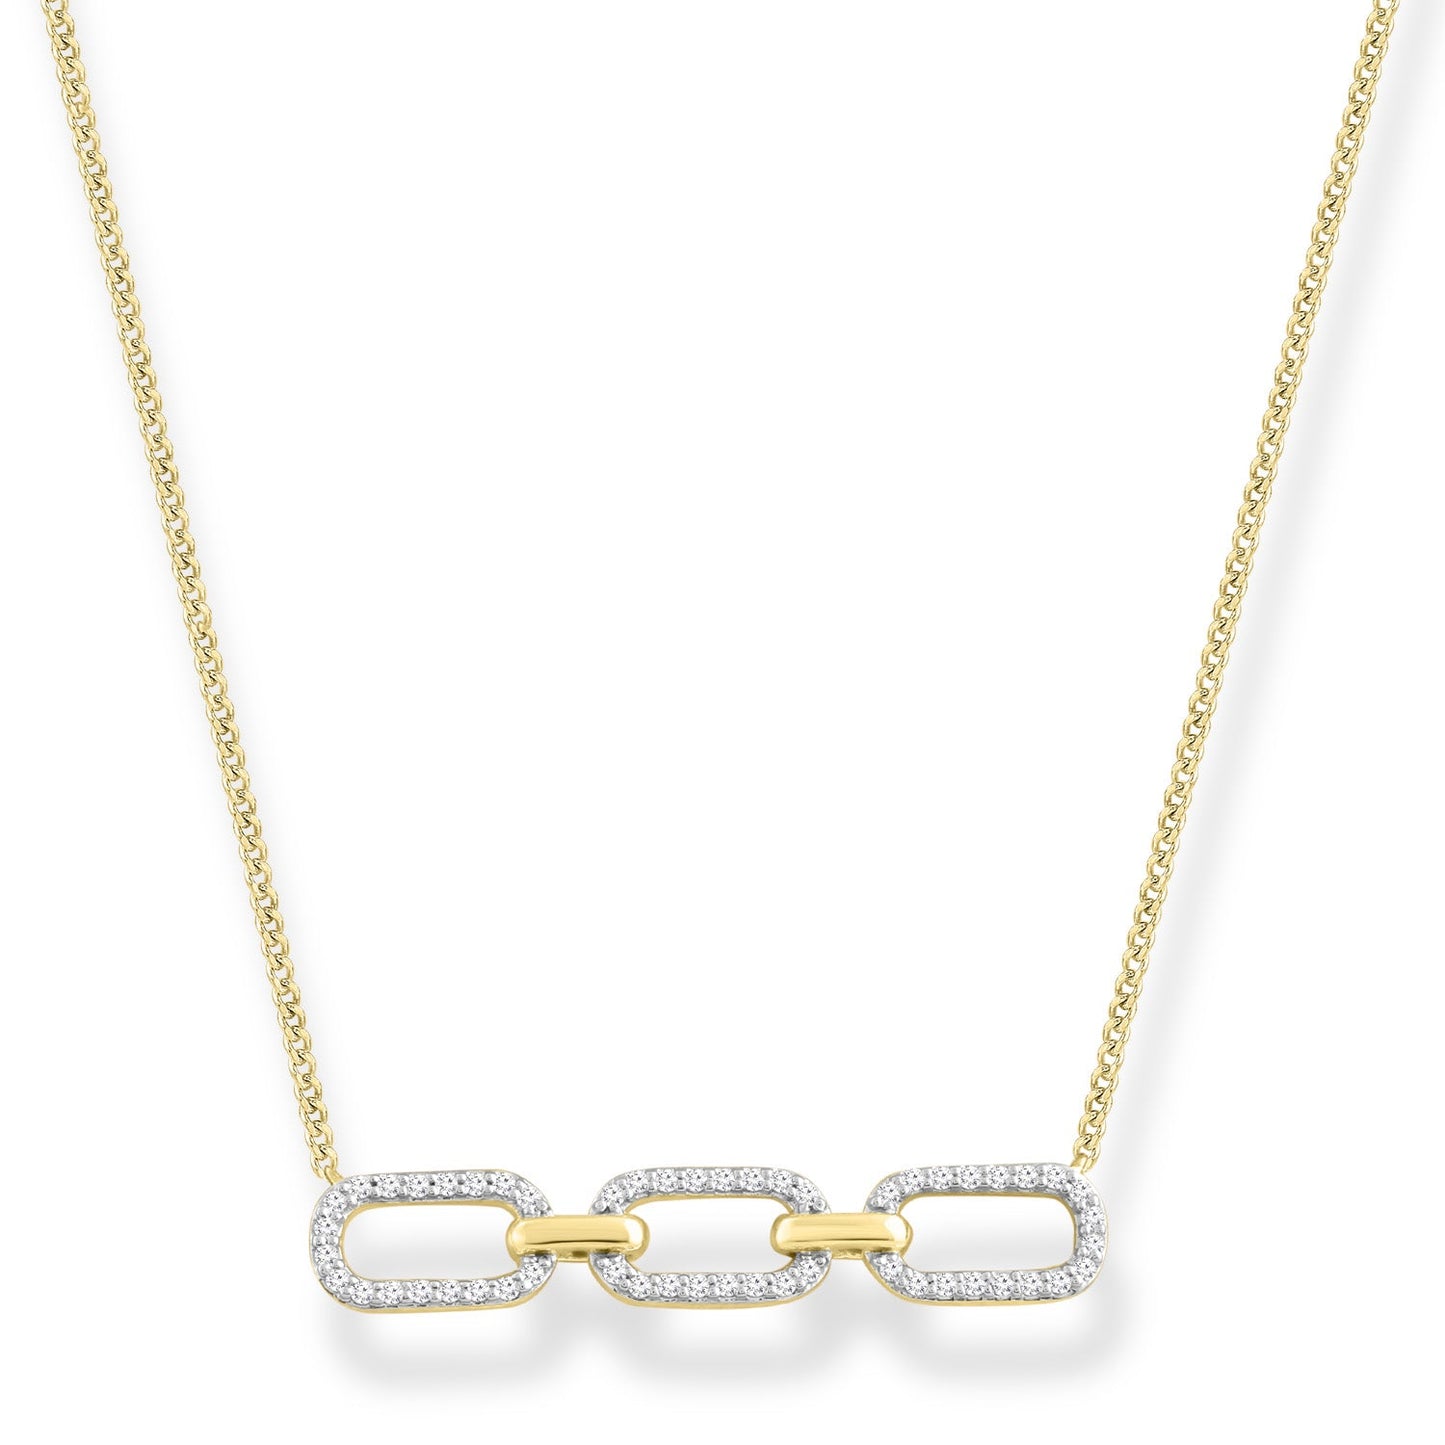 Diamond Necklace with 0.20ct Diamonds in 9K Yellow Gold